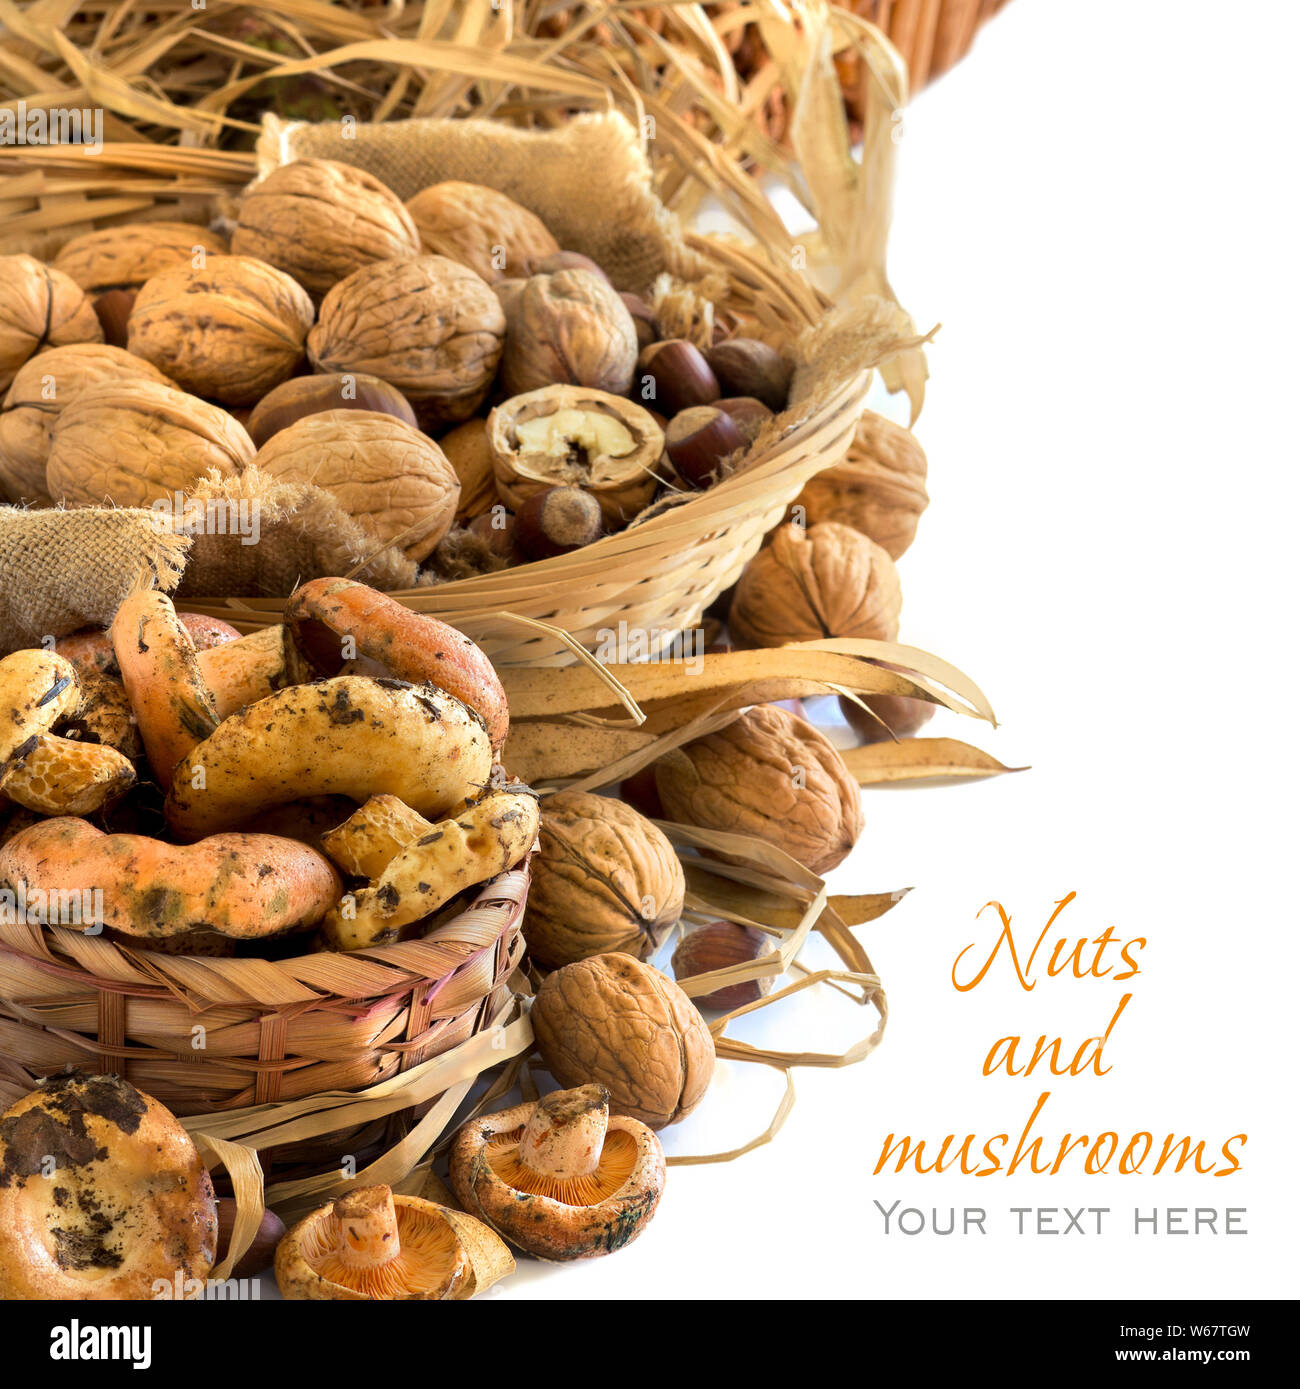 Various nuts and mushrooms in baskets - autumn background Stock Photo